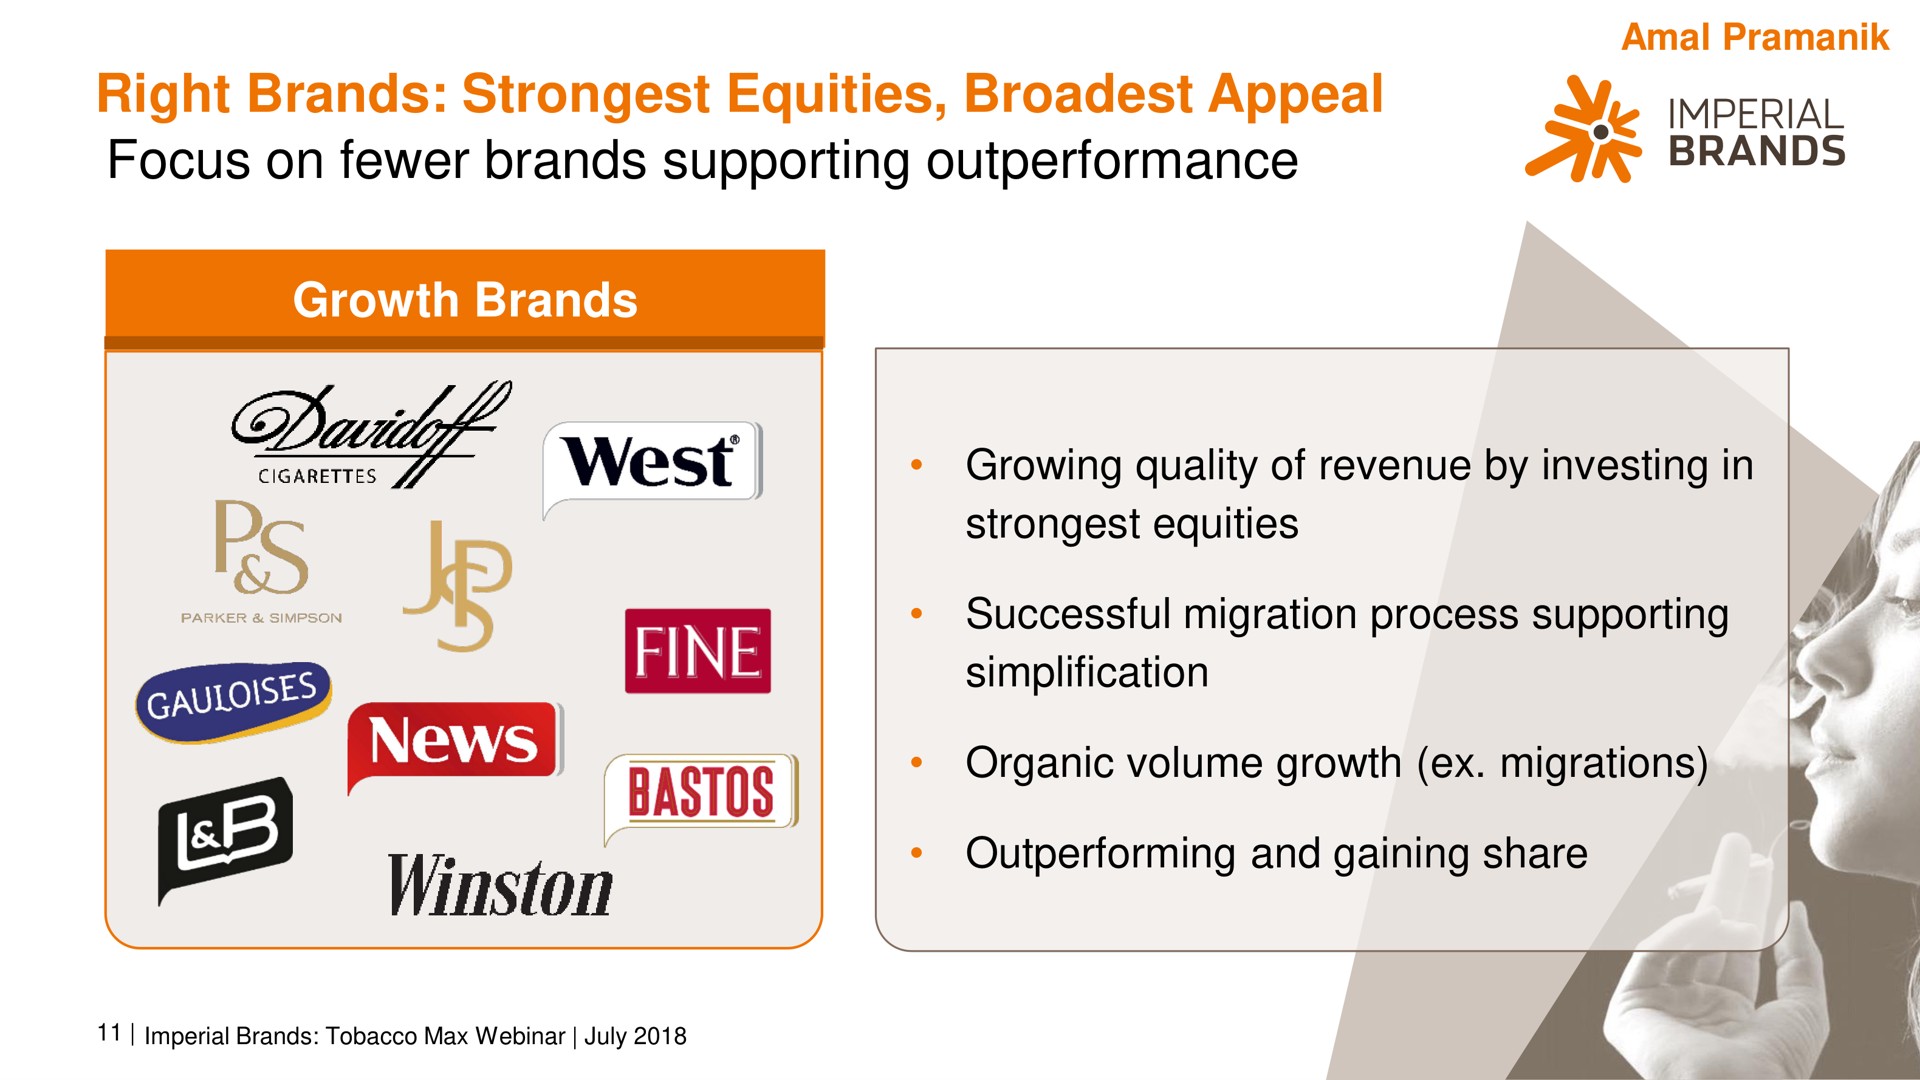 right brands equities appeal focus on brands supporting imperial | Imperial Brands